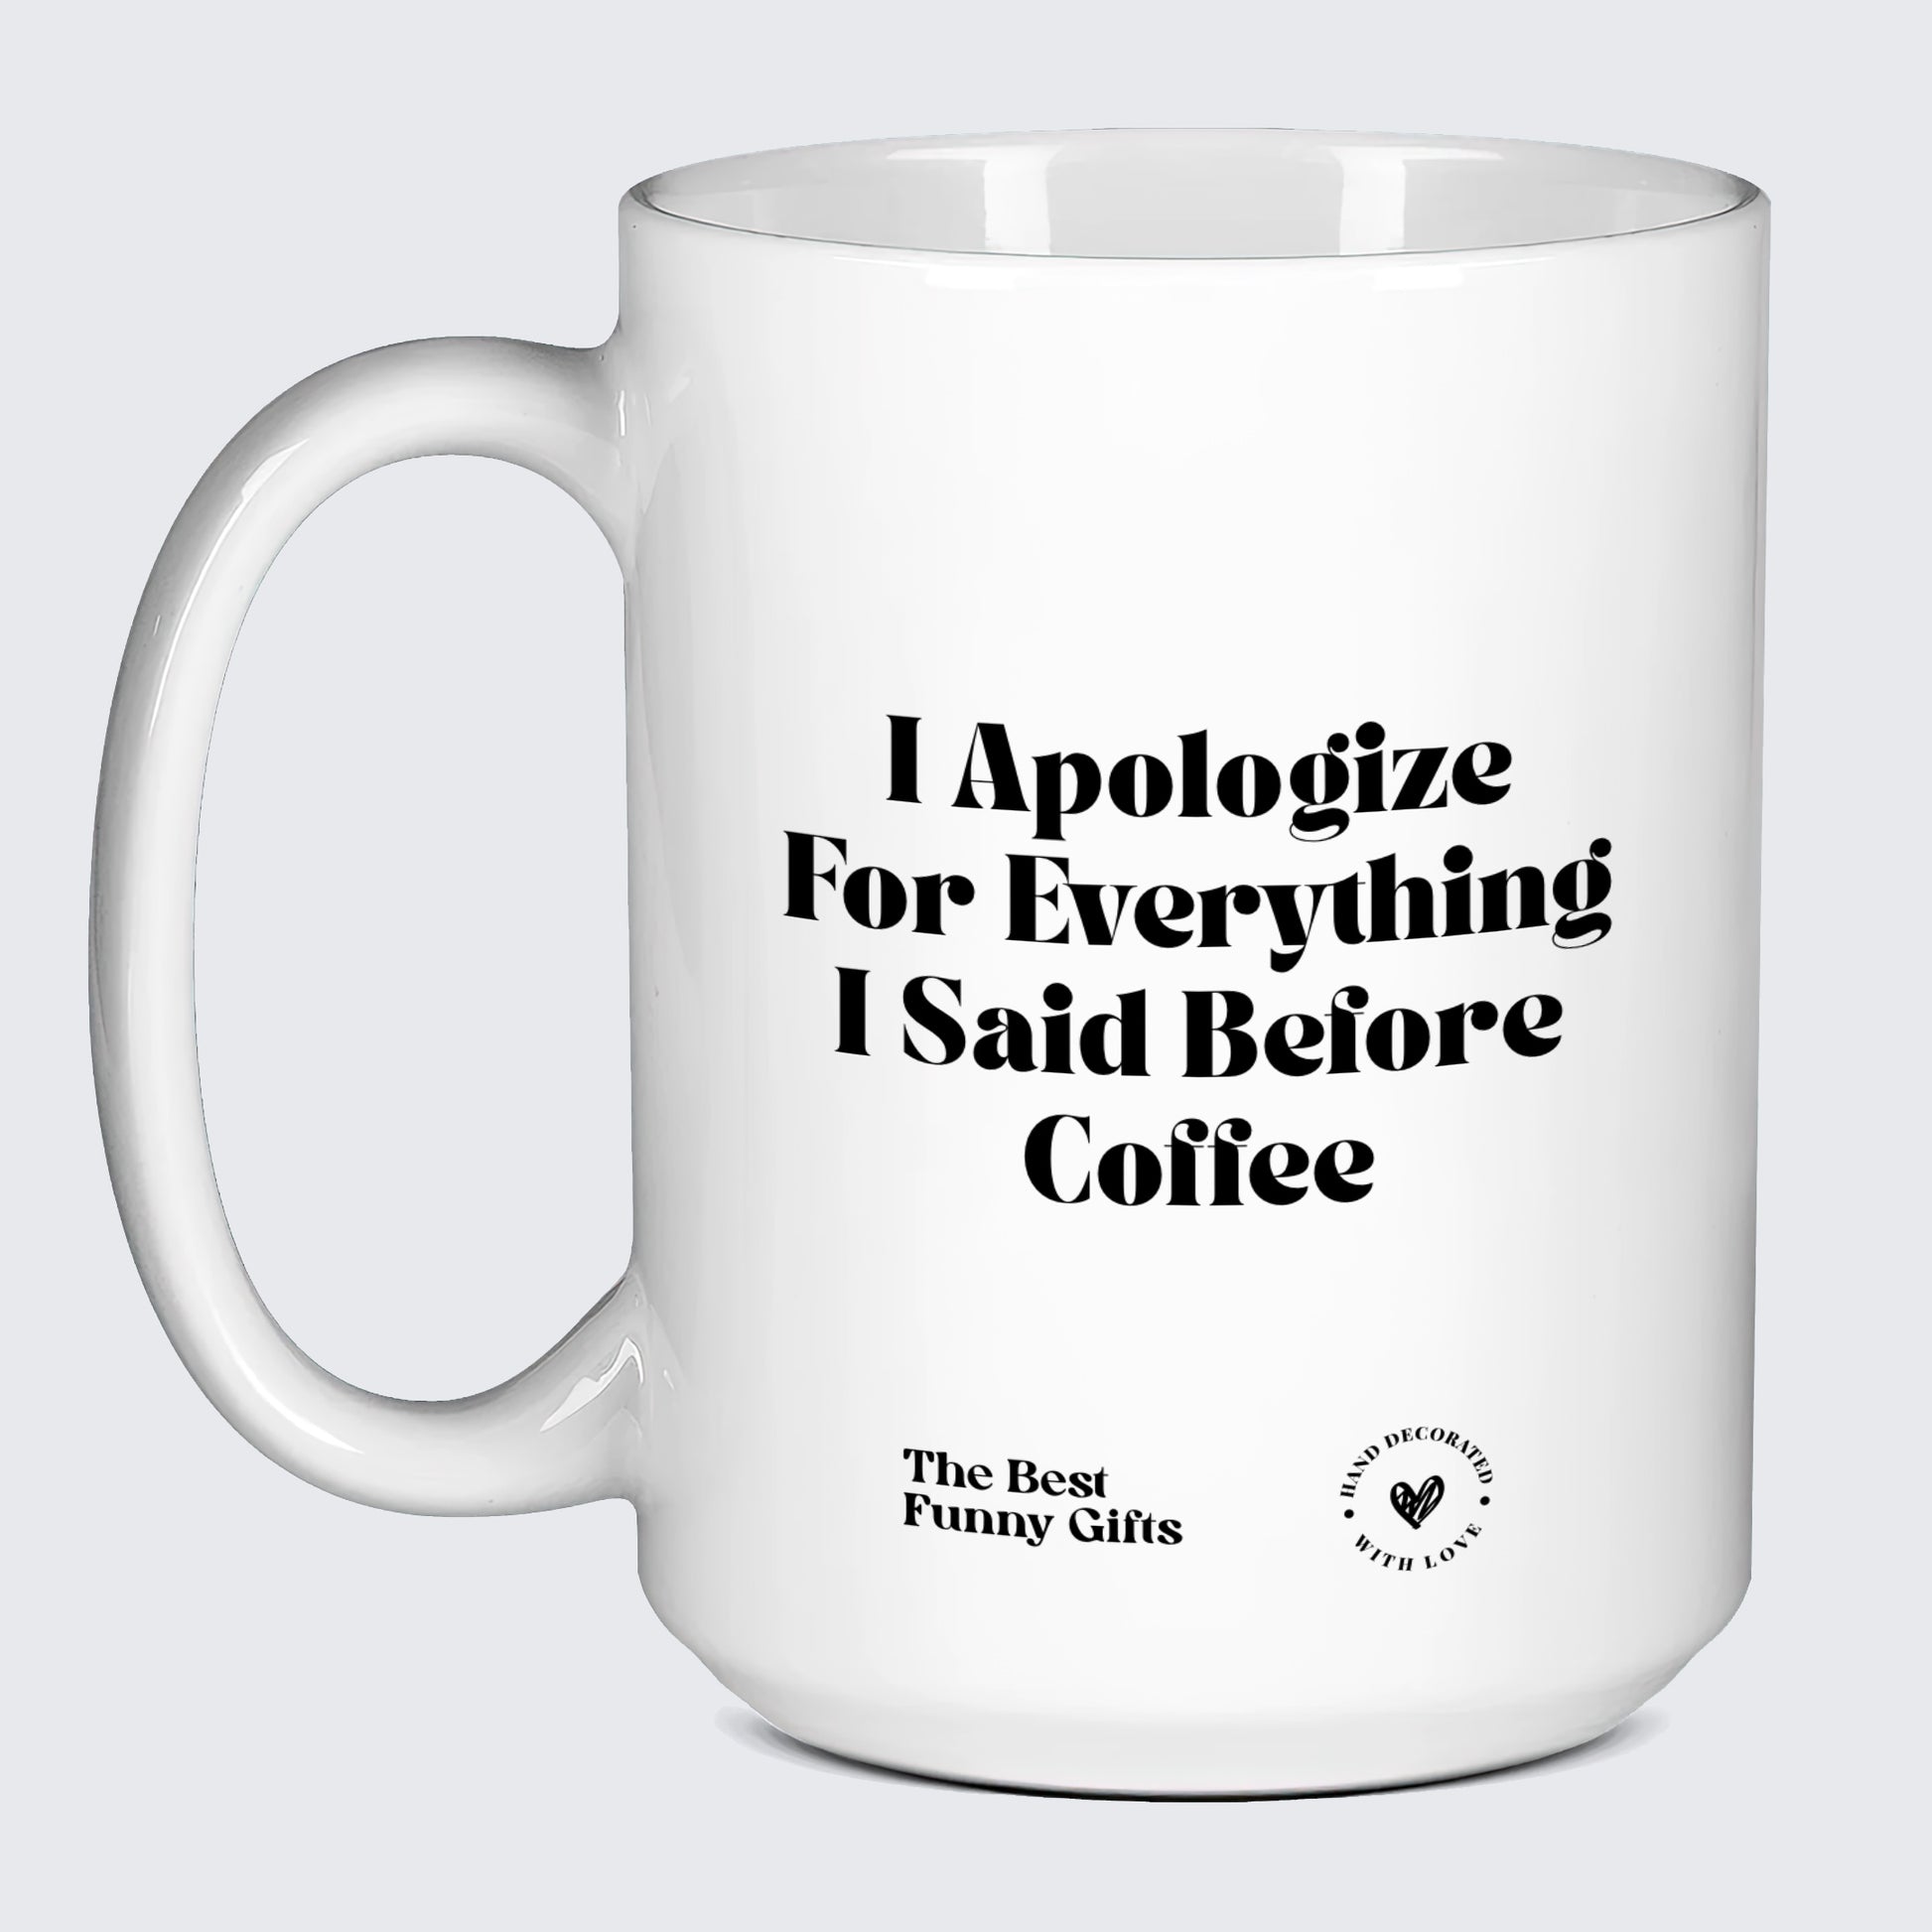 Unique Coffee Mugs I Apologize for Everything I Said Before Coffee - The Best Funny Gifts